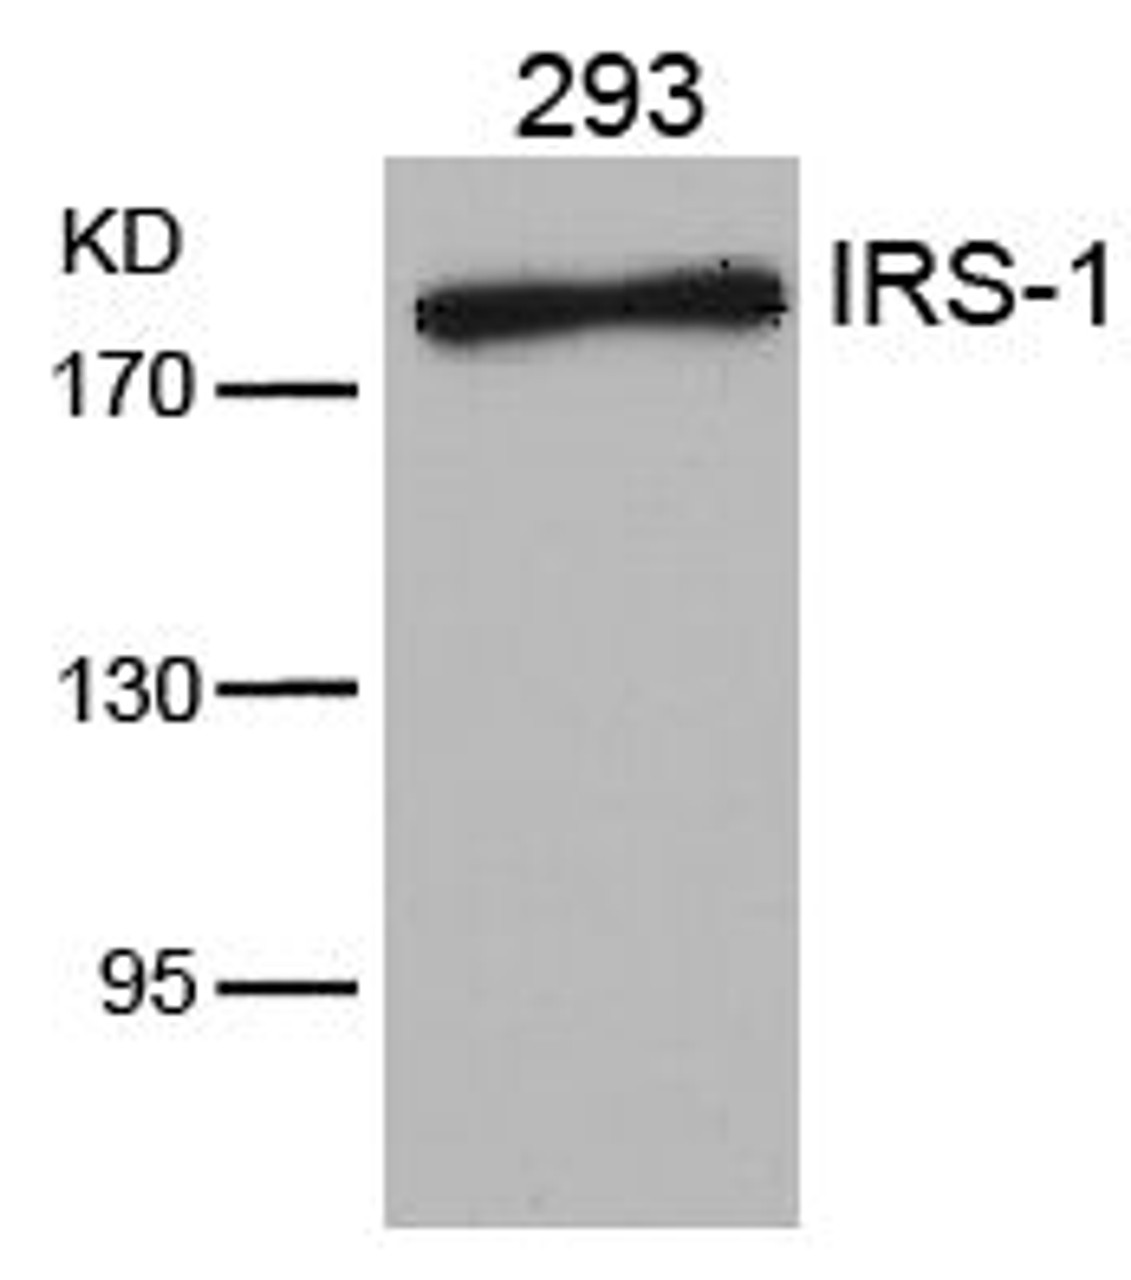 Western blot analysis of lysed extracts from 293 cells using IRS-1 (Ab-636) .